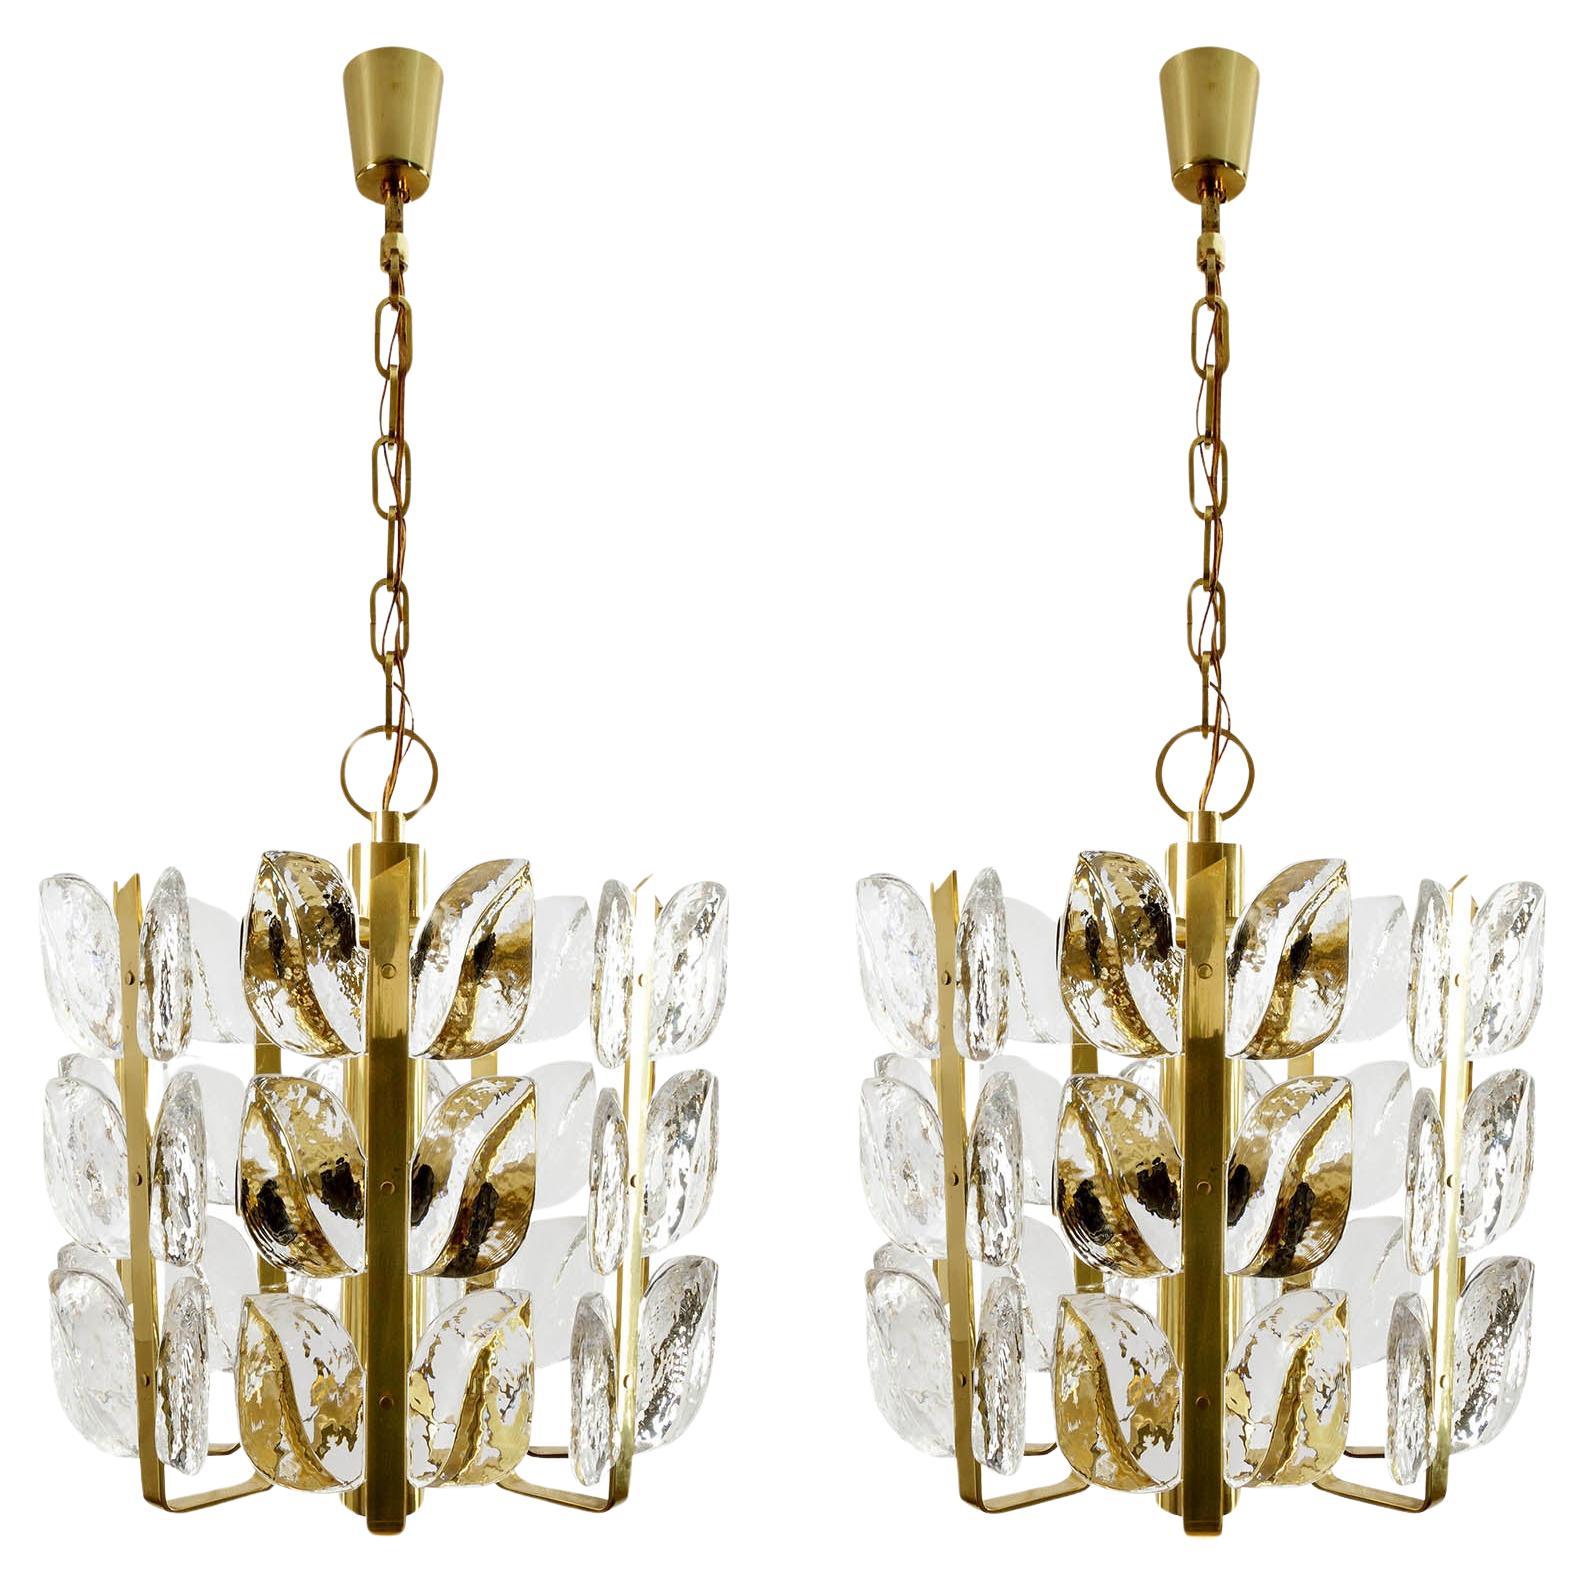 One of Two Kalmar Chandeliers or Pendant Lights 'Florida', Glass and Brass, 1970 For Sale